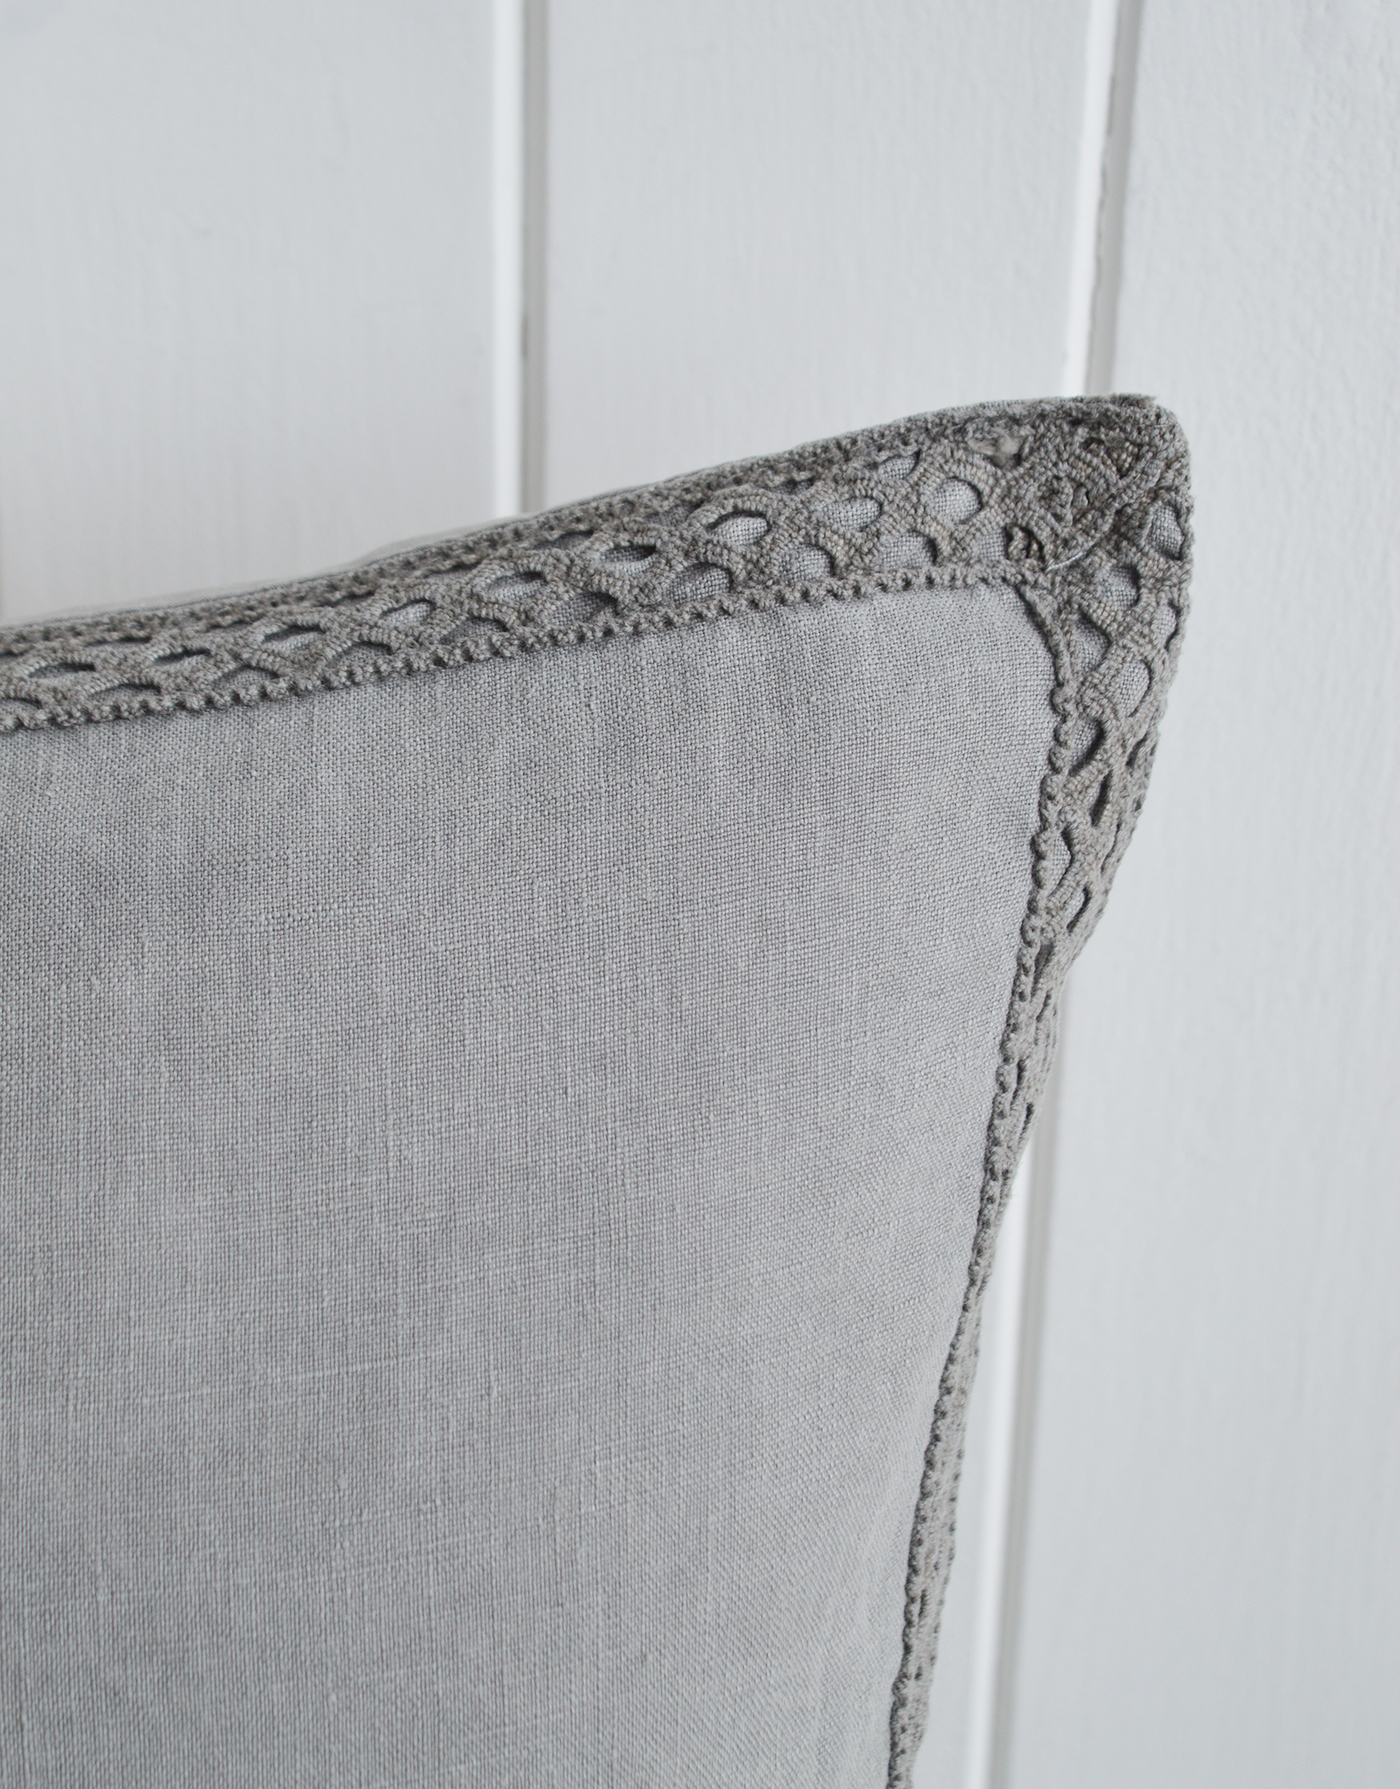 The White Lighthouse. New England Style Country, Coastal and White Furniture and accessories for the home. Richmond 100% stonewashed Linen Feather Filled Cushion